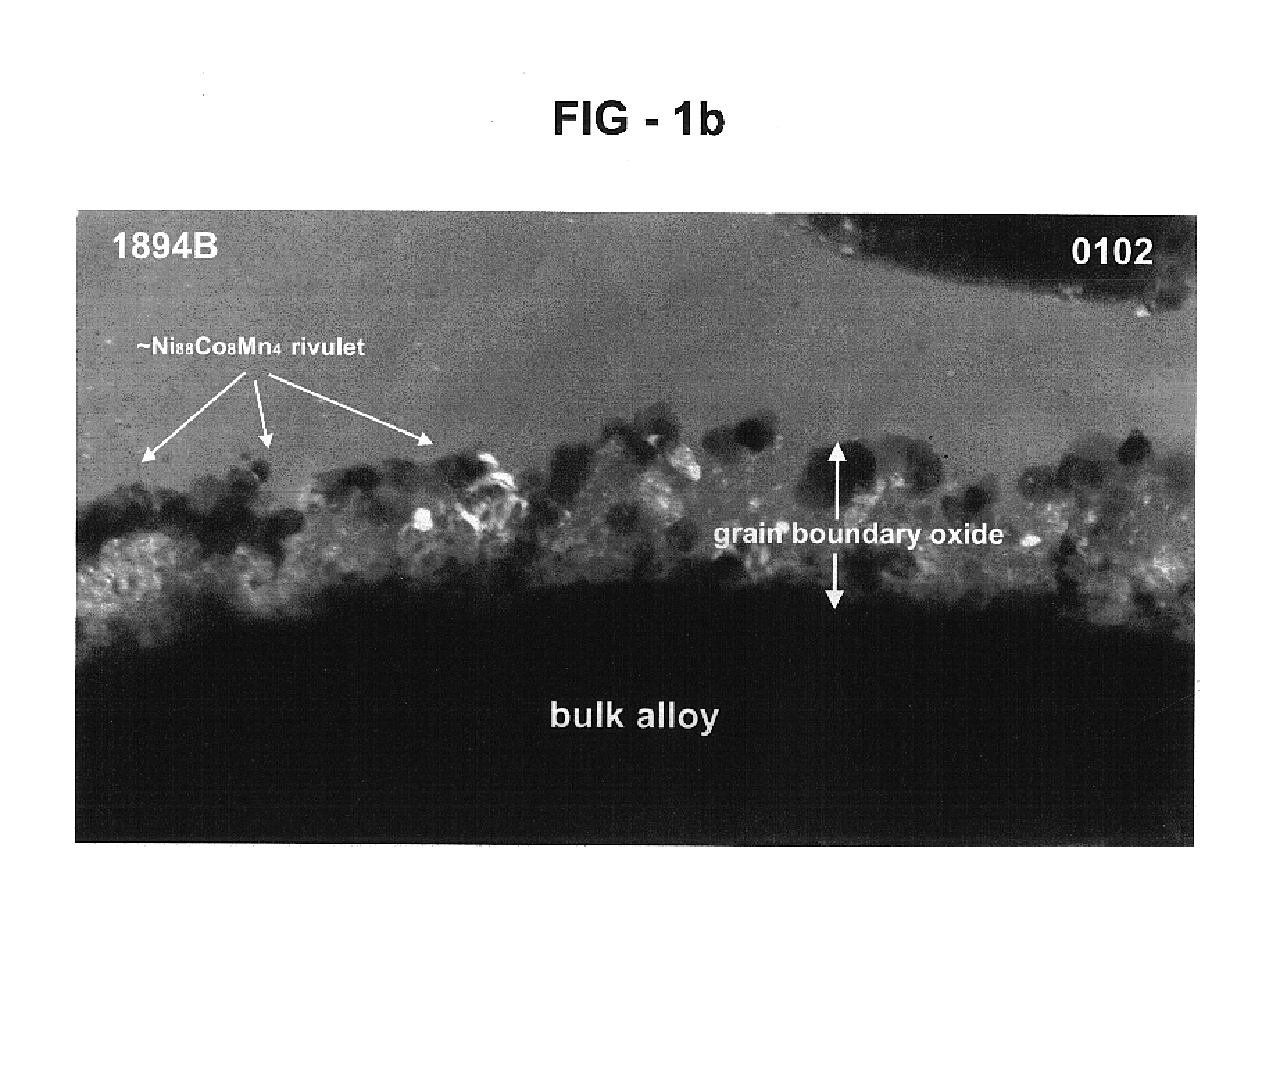 Coated catalytic material with a metal phase in contact with a grain boundary oxide